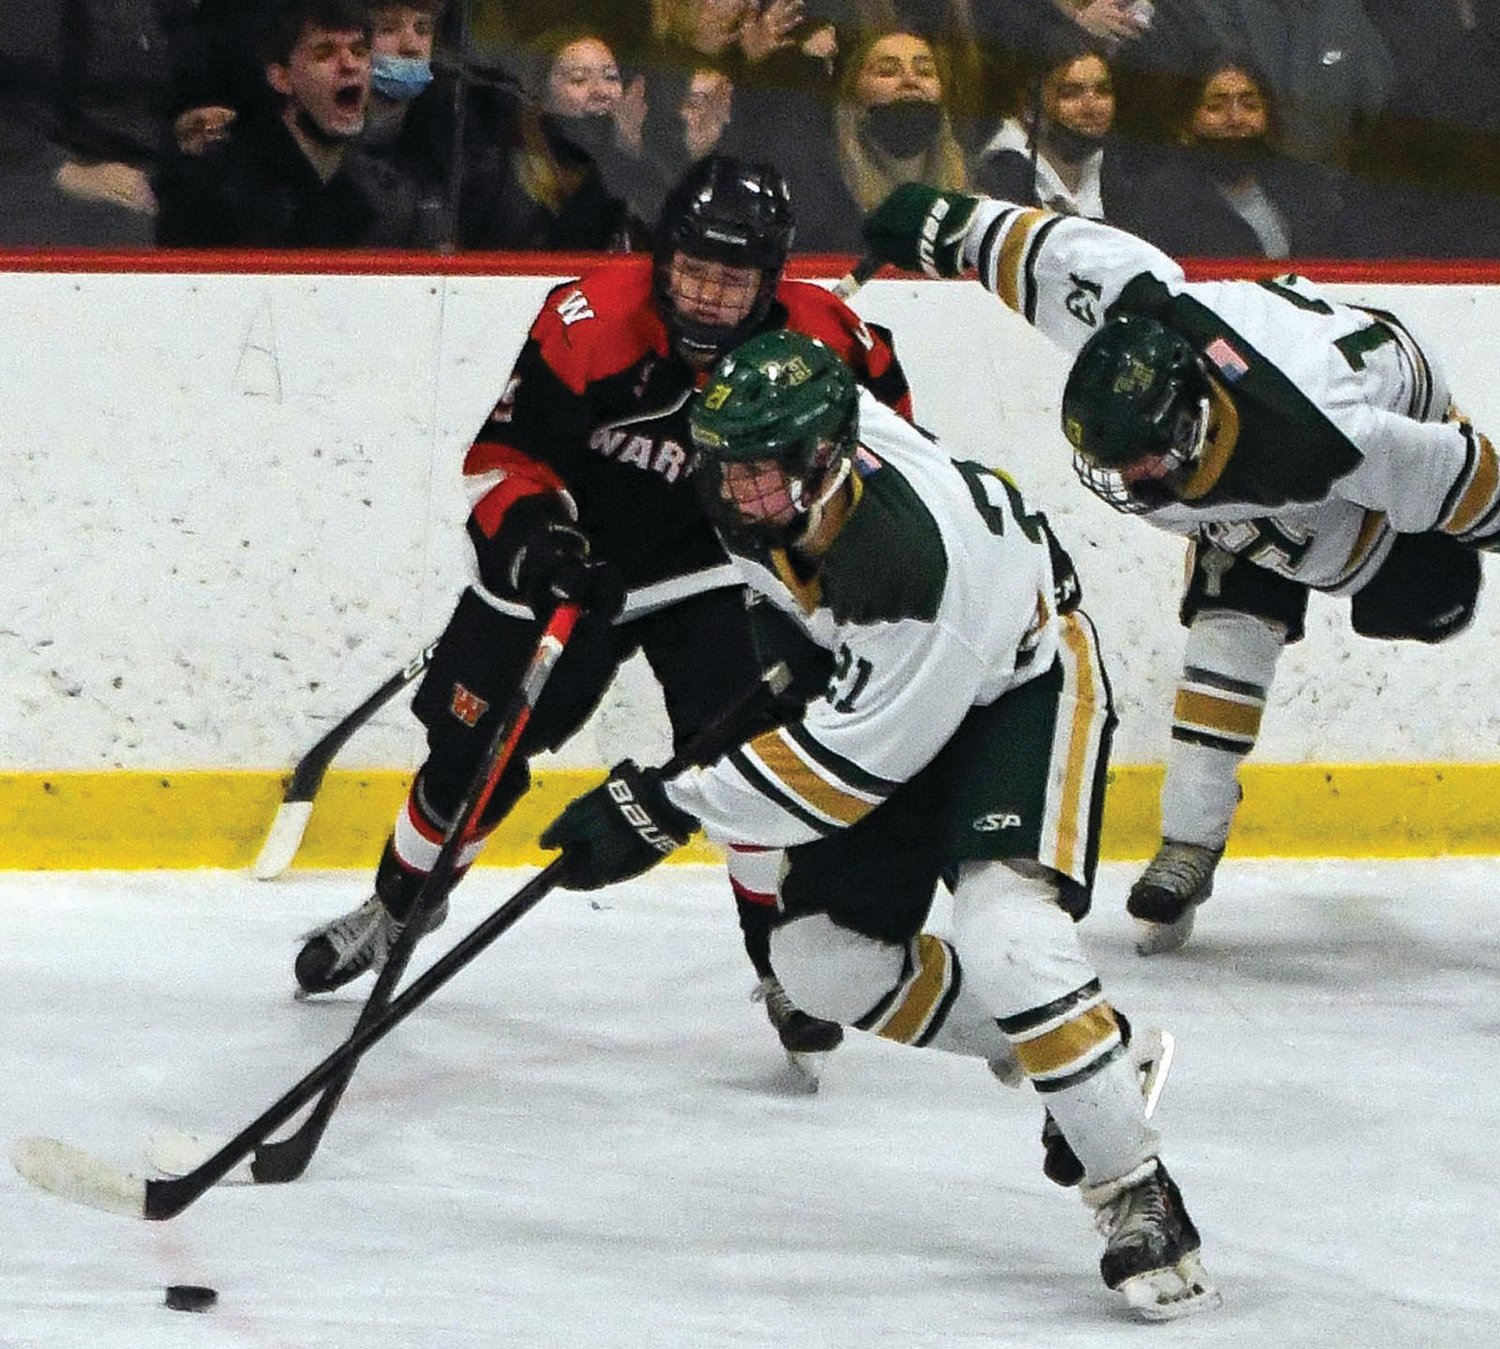 UP THE ICE: Bishop Hendricken’s Will Cavanagh takes the puck up the ice last week.